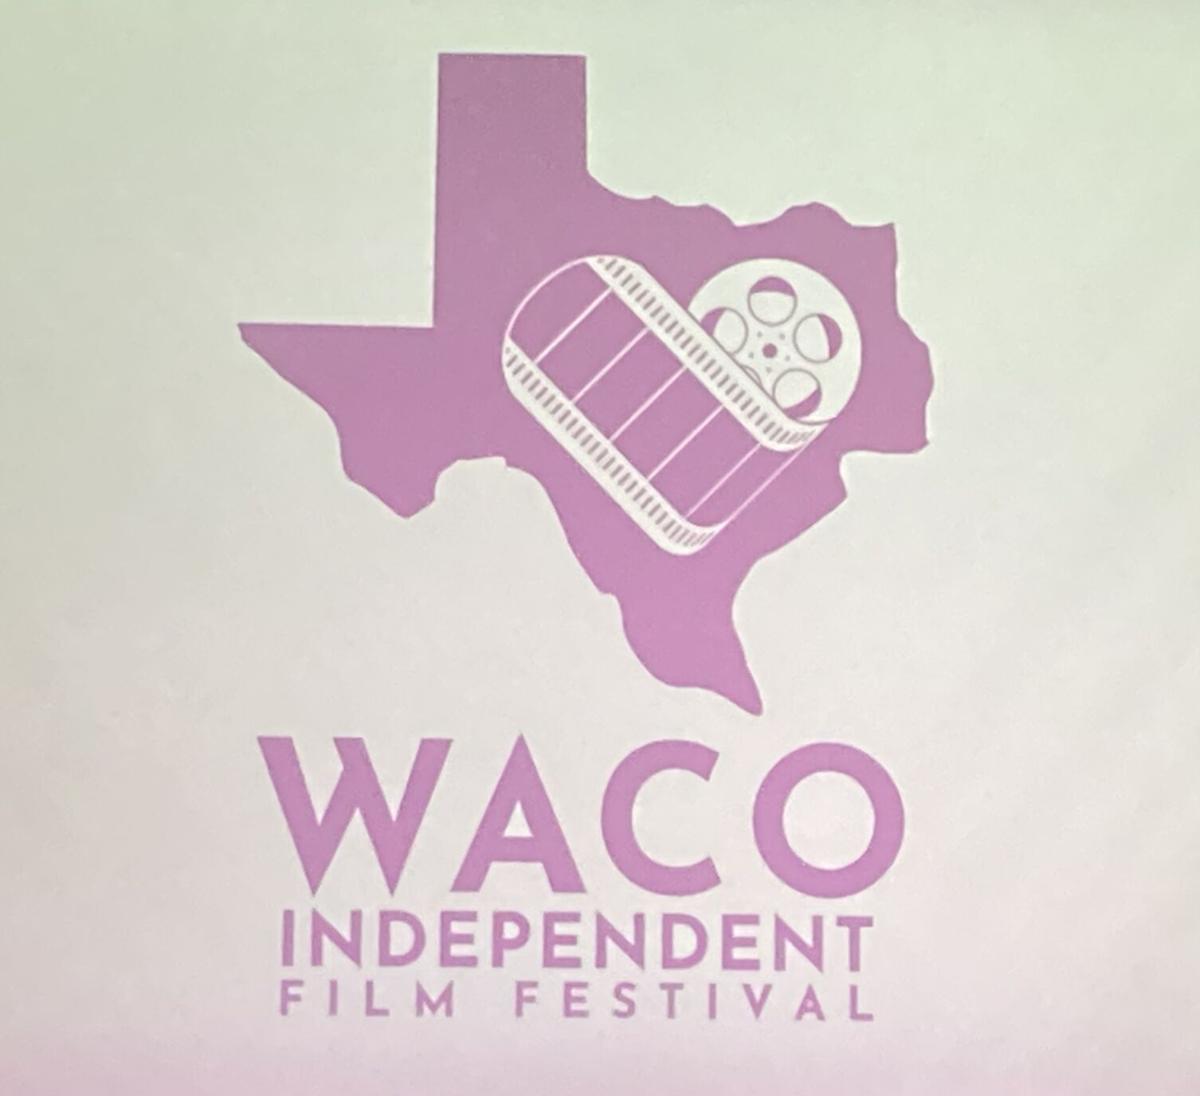 Waco film festival begins with new name announced